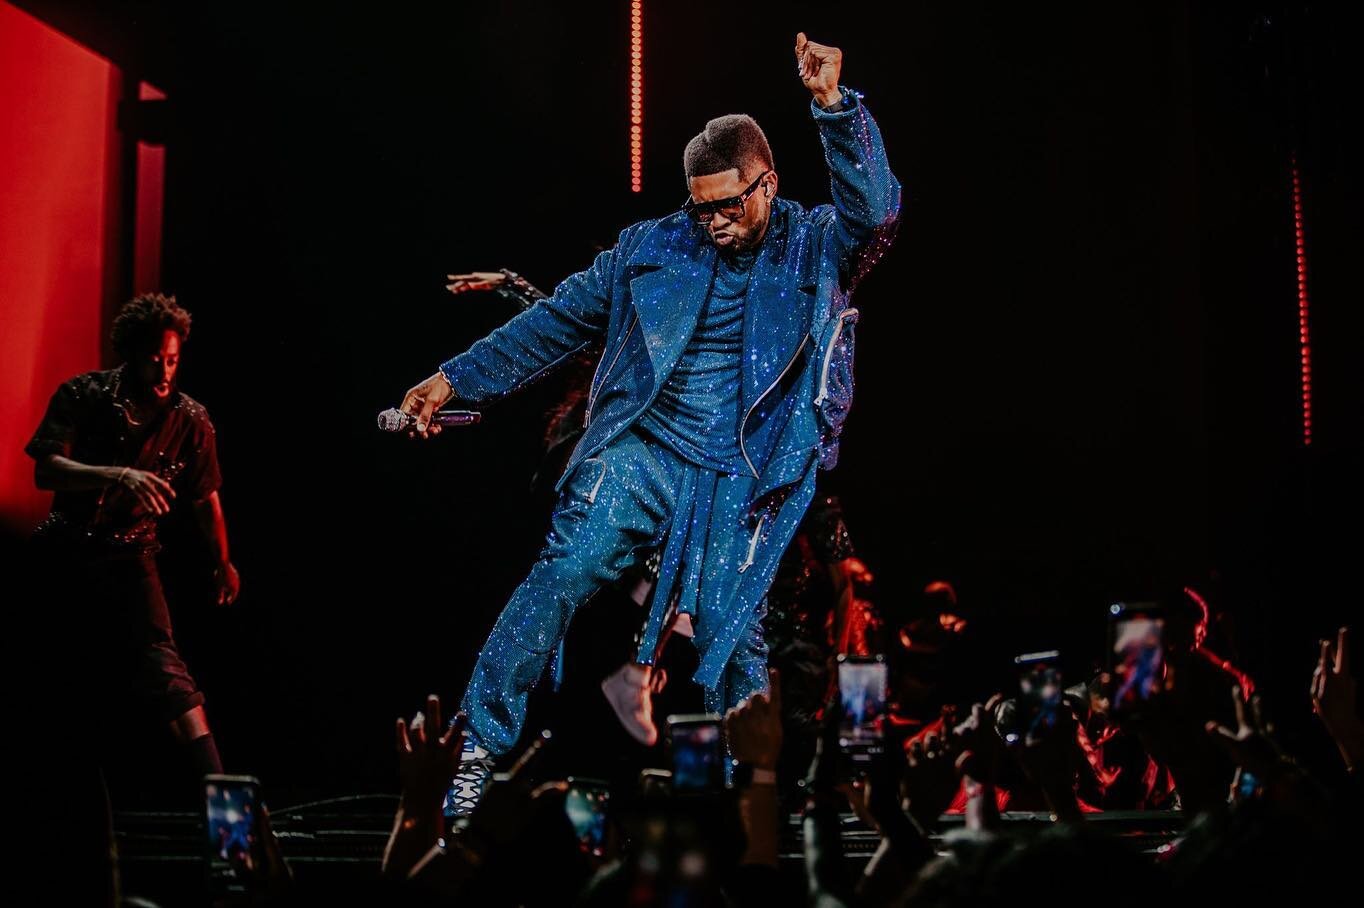 Our clients at the ultimate @usher experience! They were able to be apart of Usher&rsquo;s prayer group, meet him, and sit on stage during his performance @dolbytheatre 

That&rsquo;s a wrap for his 2022 Vegas Residency, but email concierge@confirmed